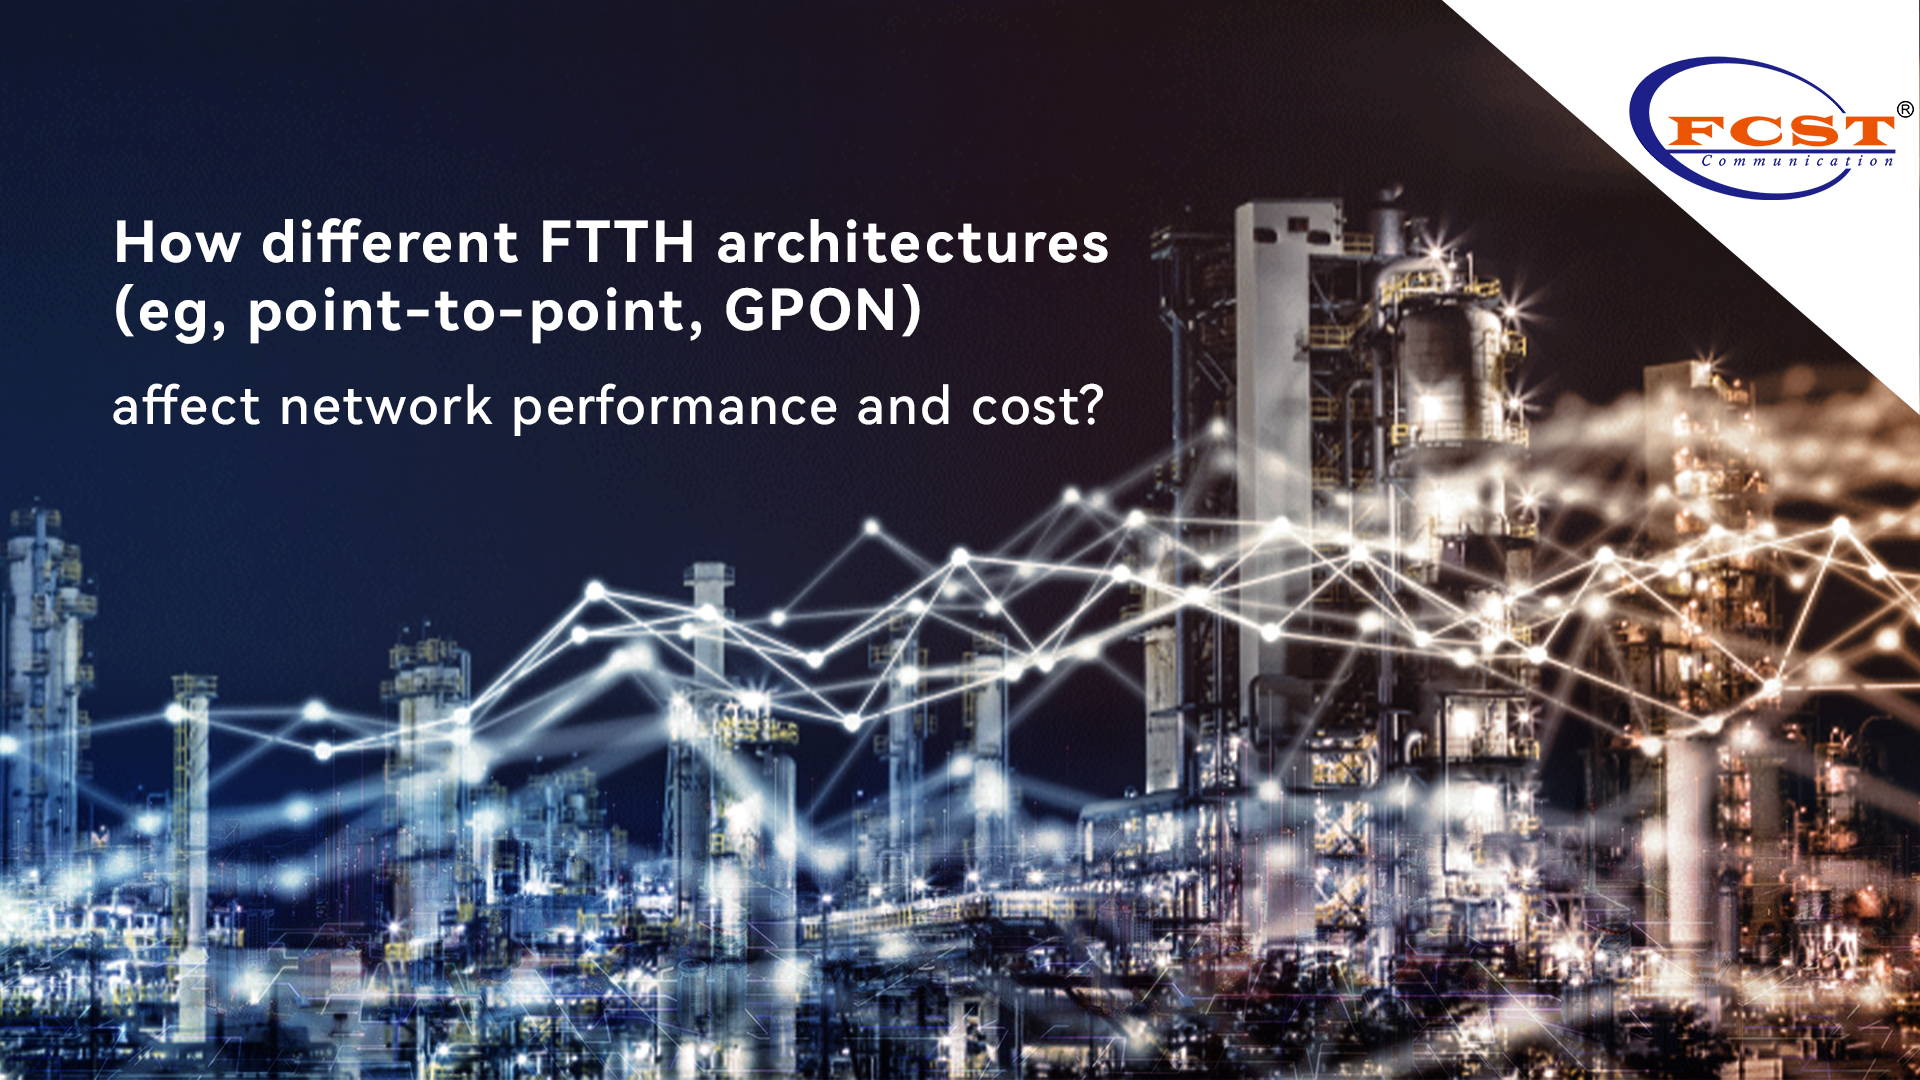 How different FTTH architectures (eg, point-to-point, GPON) affect network performance and cost?